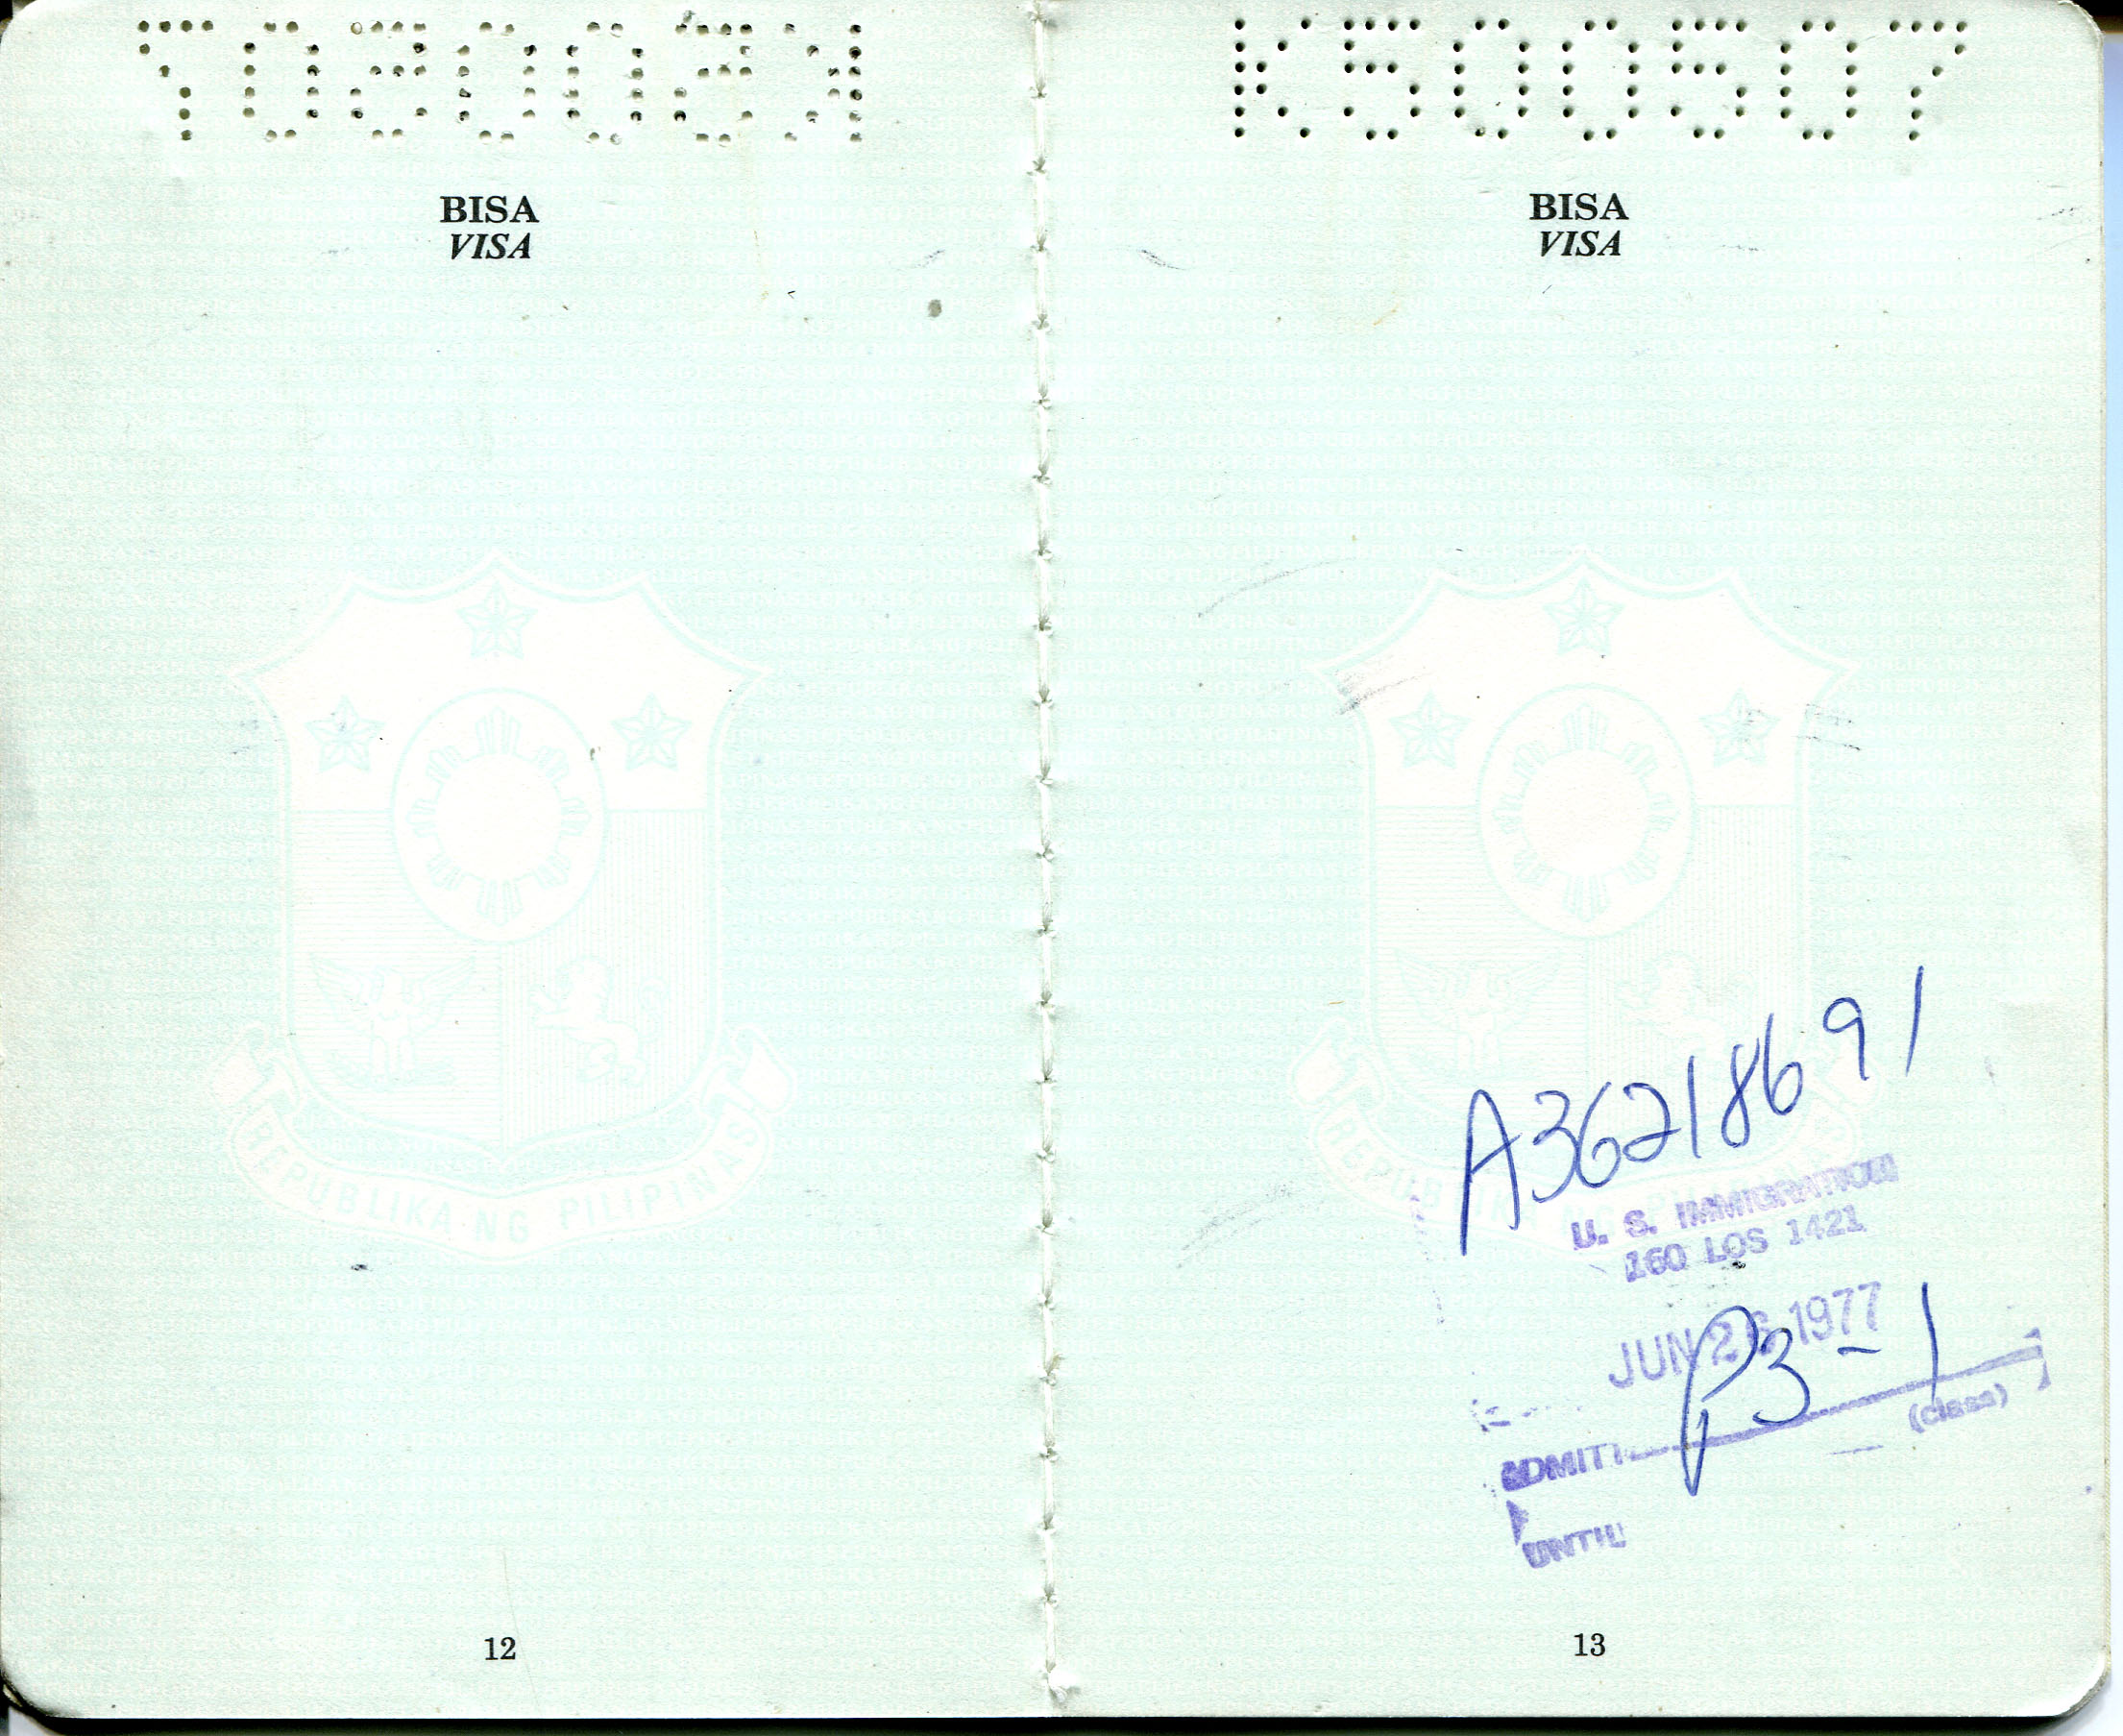 'Scan - Pages 12 and 13 of passport of Etta McKenna.
1976 Passport from the Philippine Immigration Office, during process to immigrate to the US.

Names of passport pages in Wika Filipino “Pasaporte” and “Republica”

Notes from Sarah Carlson, in discussion with McKenna: “First Phil. passport I used when I immigrated to the US in 1977. It reminded me of the months of overtime work in order to afford, prepare and complete all documents needed to come to the US. Without any relatives to support me in the US, I had to make sure I had enough to support myself the first few months in the new land until I got a job. The process, even though difficult, is worth remembering.” 

Any views, findings, conclusions, or recommendations expressed in this story do not necessarily represent those of the National Endowment for the Humanities. (c) Field Museum of Natural History - CC BY-NC 4.0